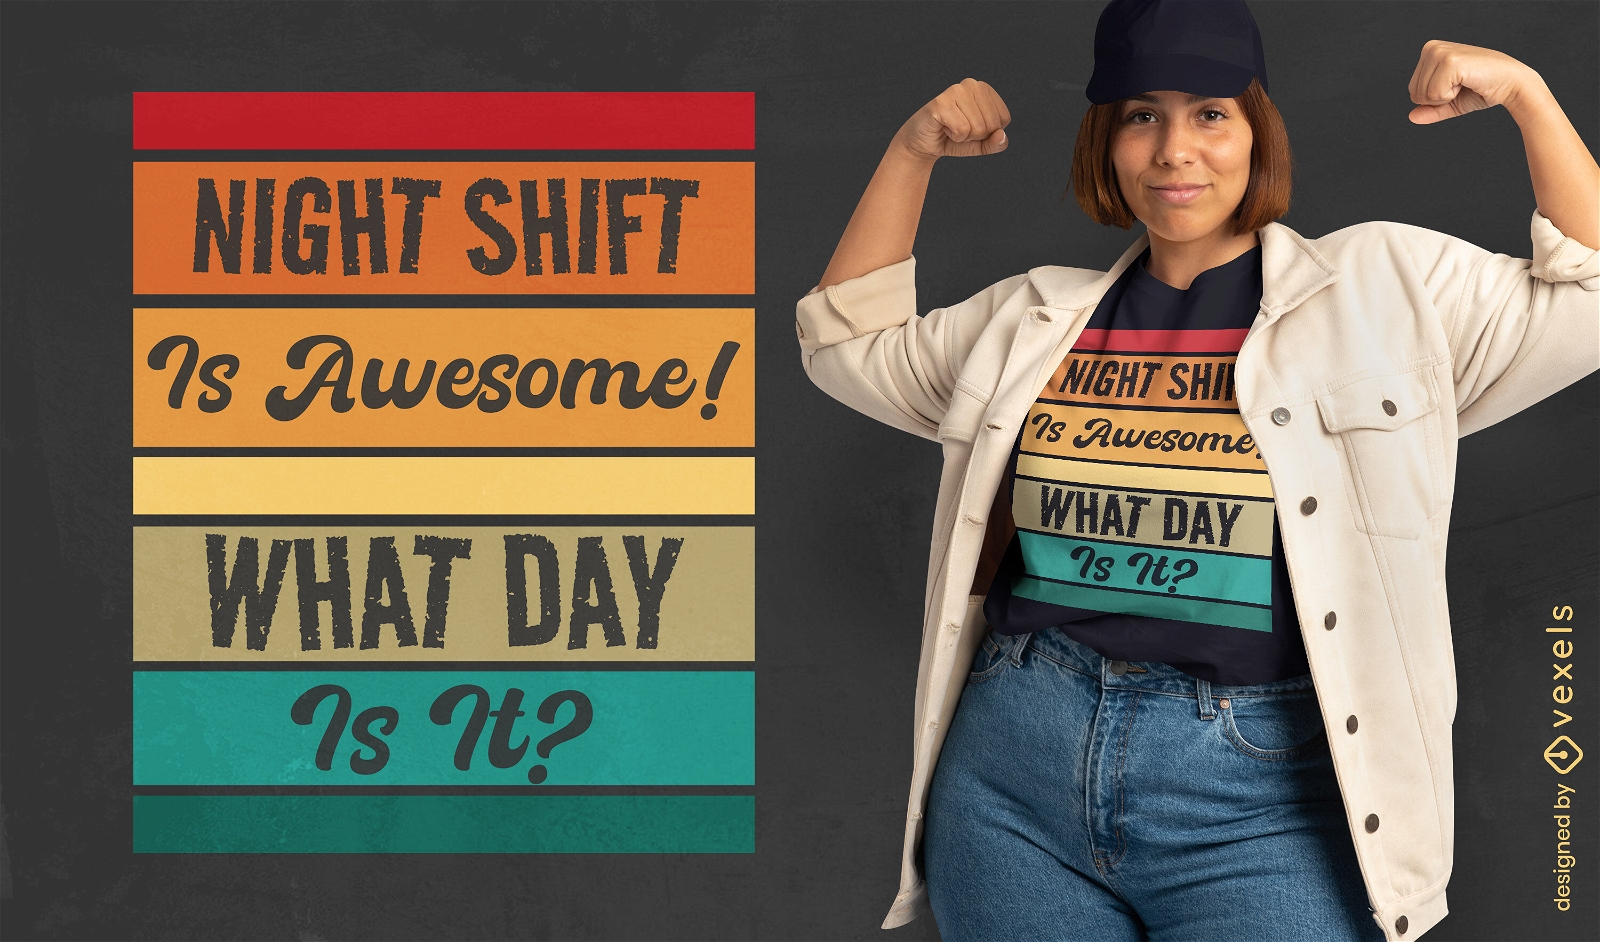 Night shift is awesome t-shirt design